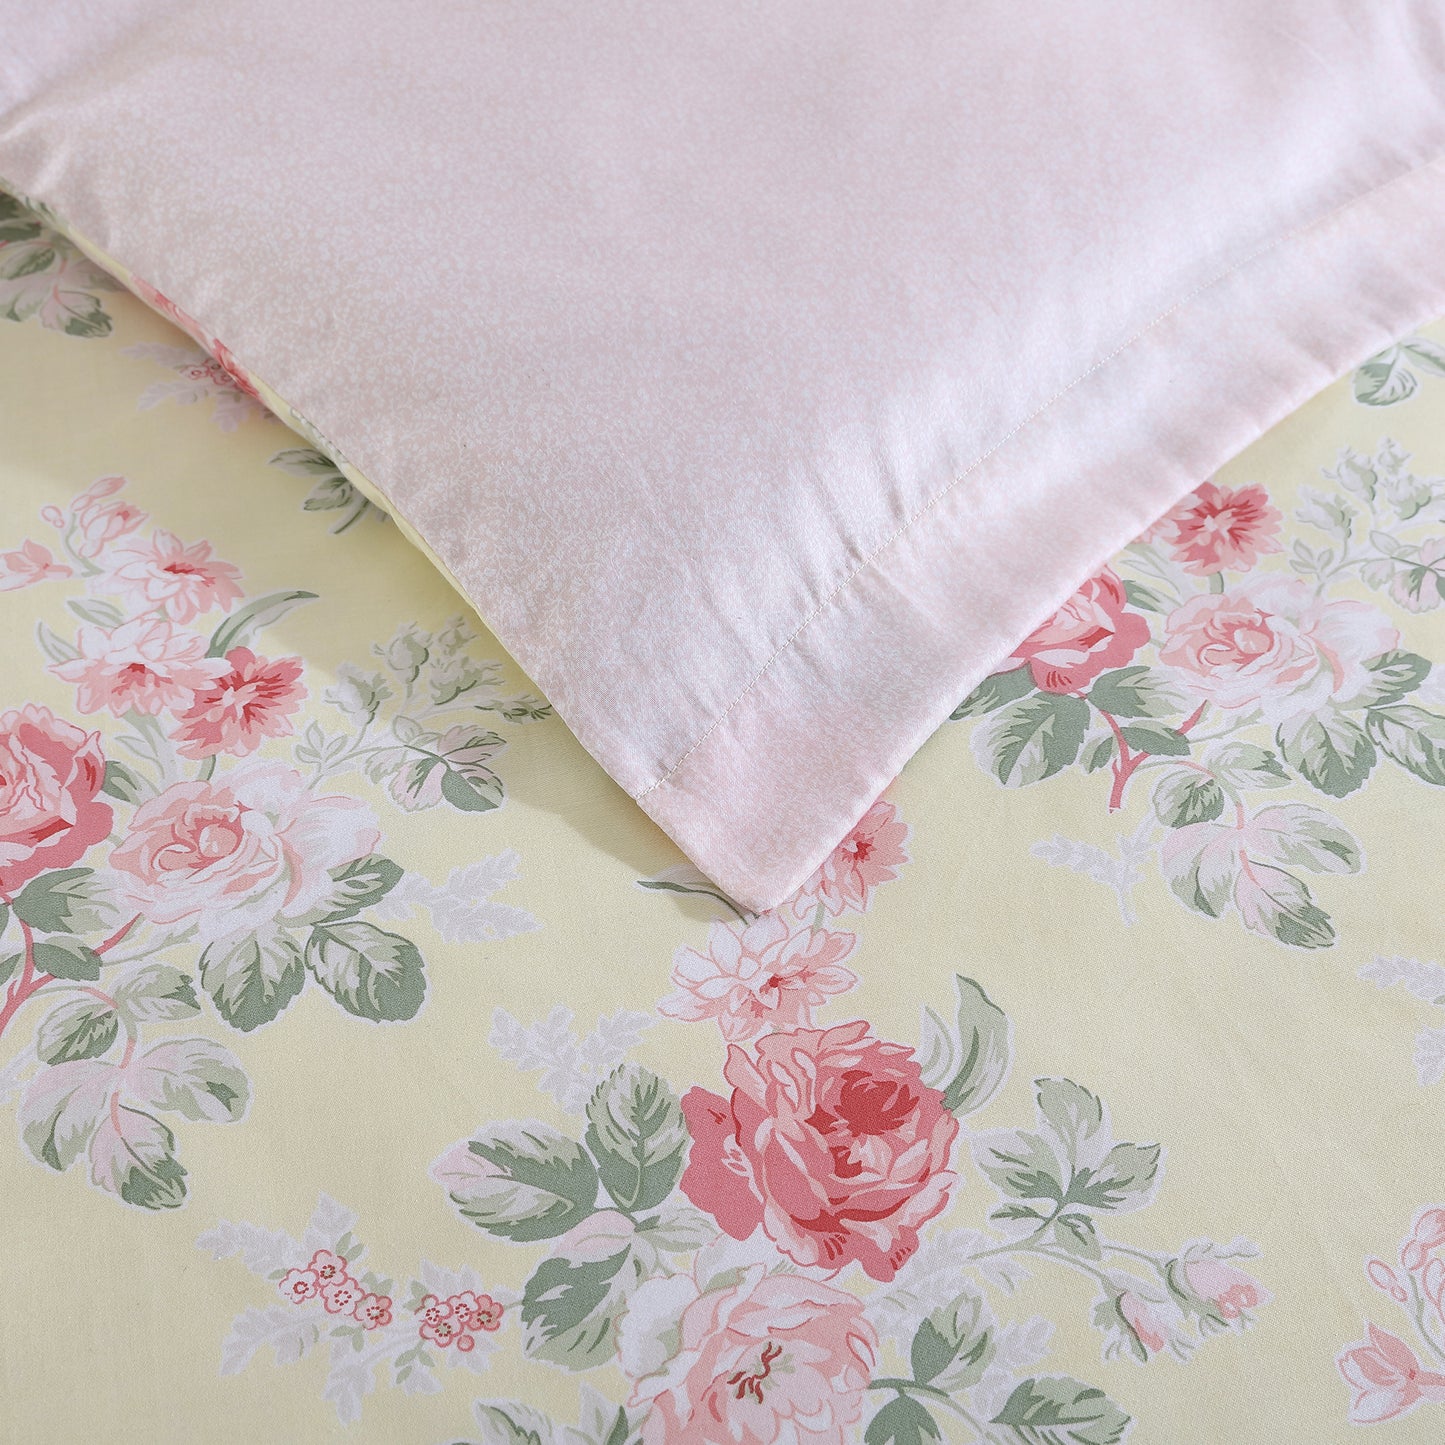 Melany Quilt Cover Set by Laura Ashley